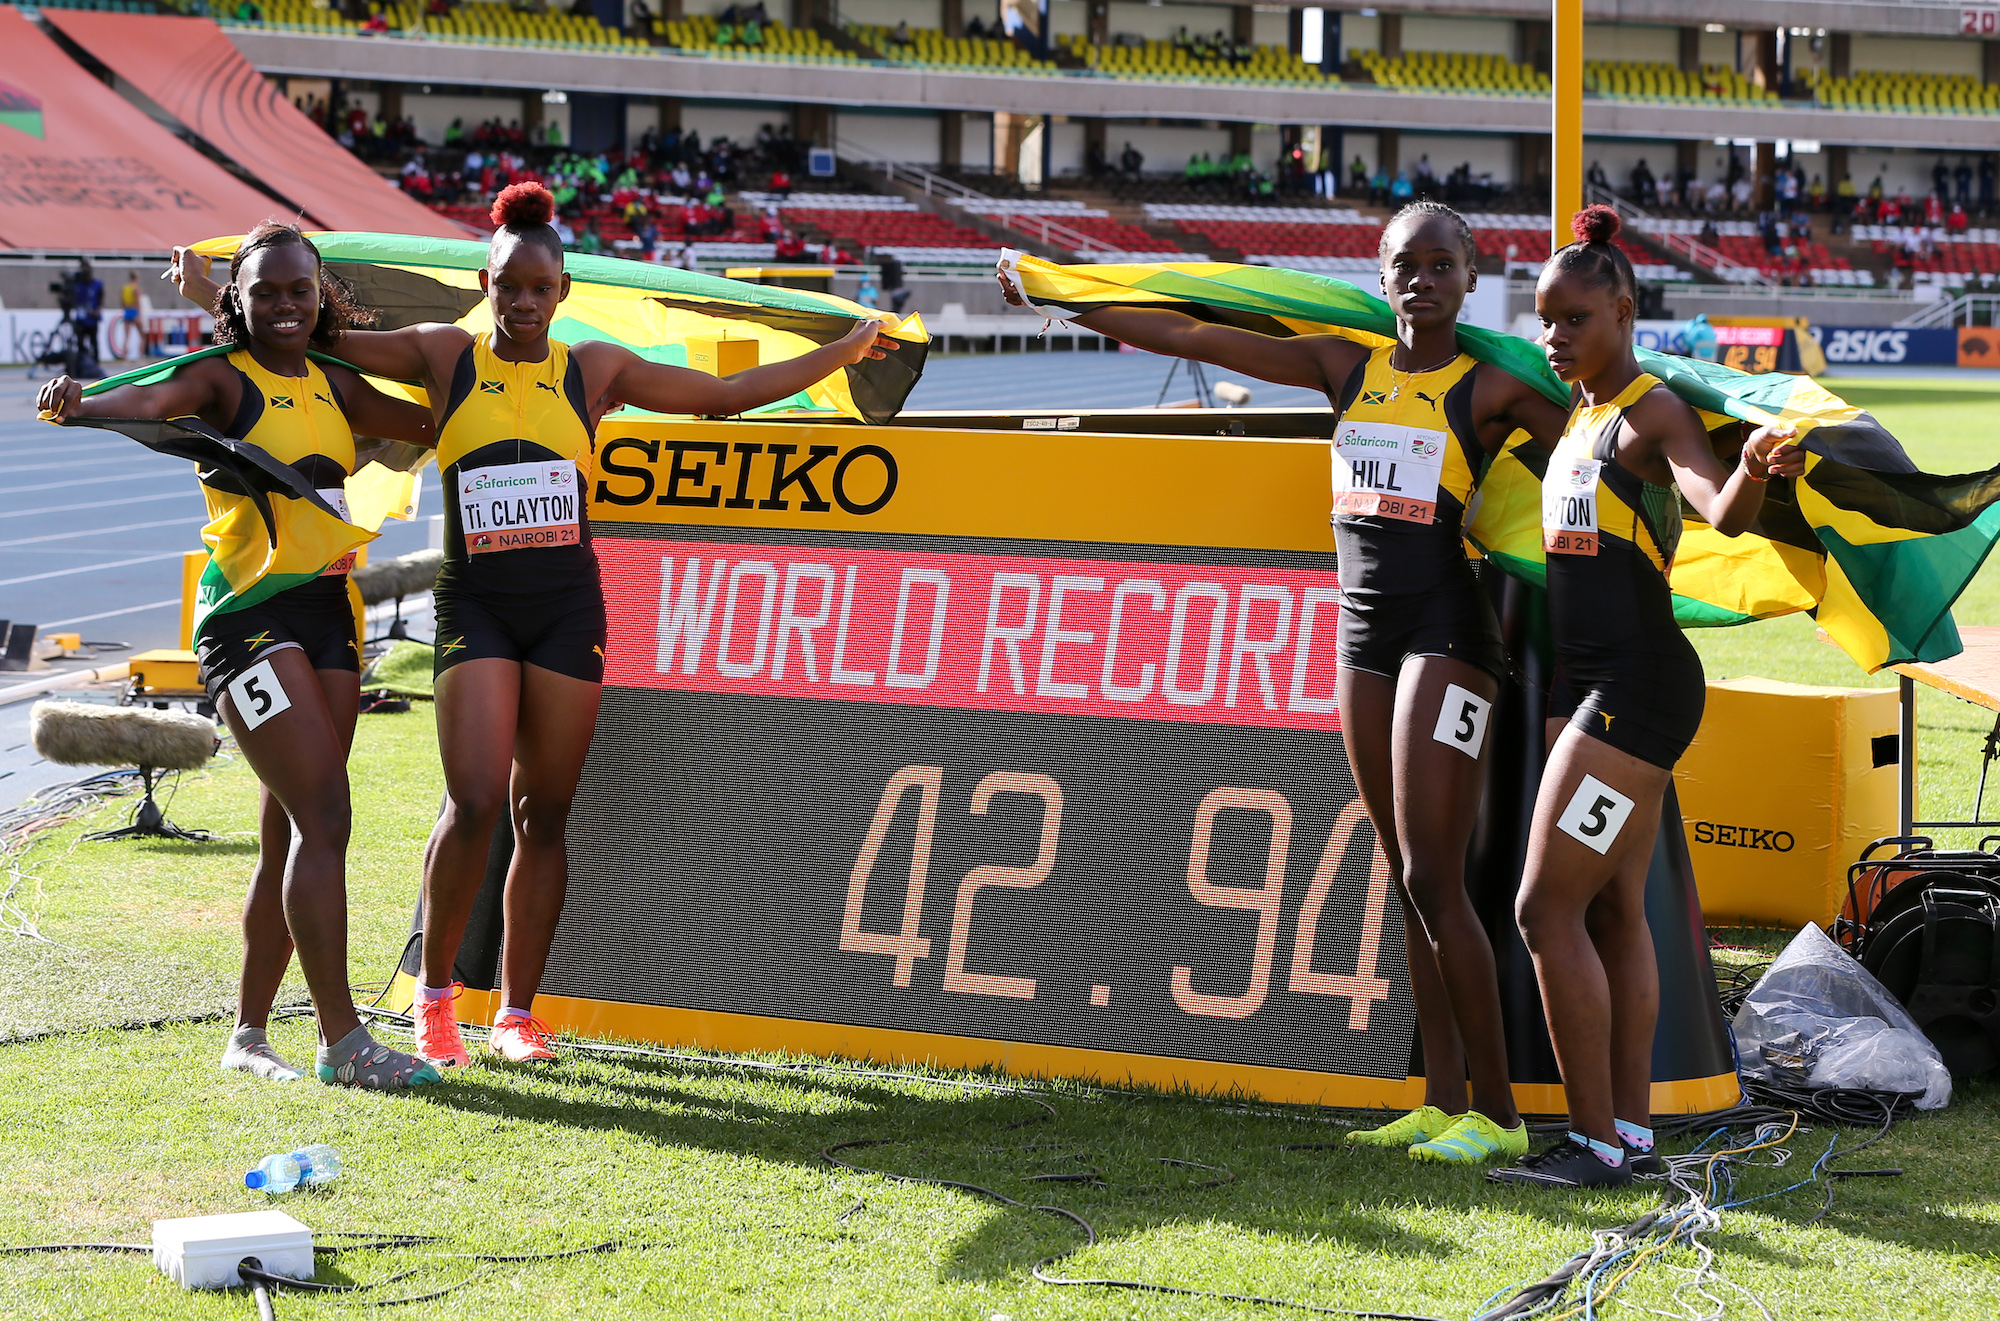 Jamaica's 4x100m sprint relay team of Serena Cole, Tina Clayton, Kerrica Hill and Tia Clayton set a new World U20 record of 42.92 on the final day of the Nairobi 2021 World Athletics U20 Championships